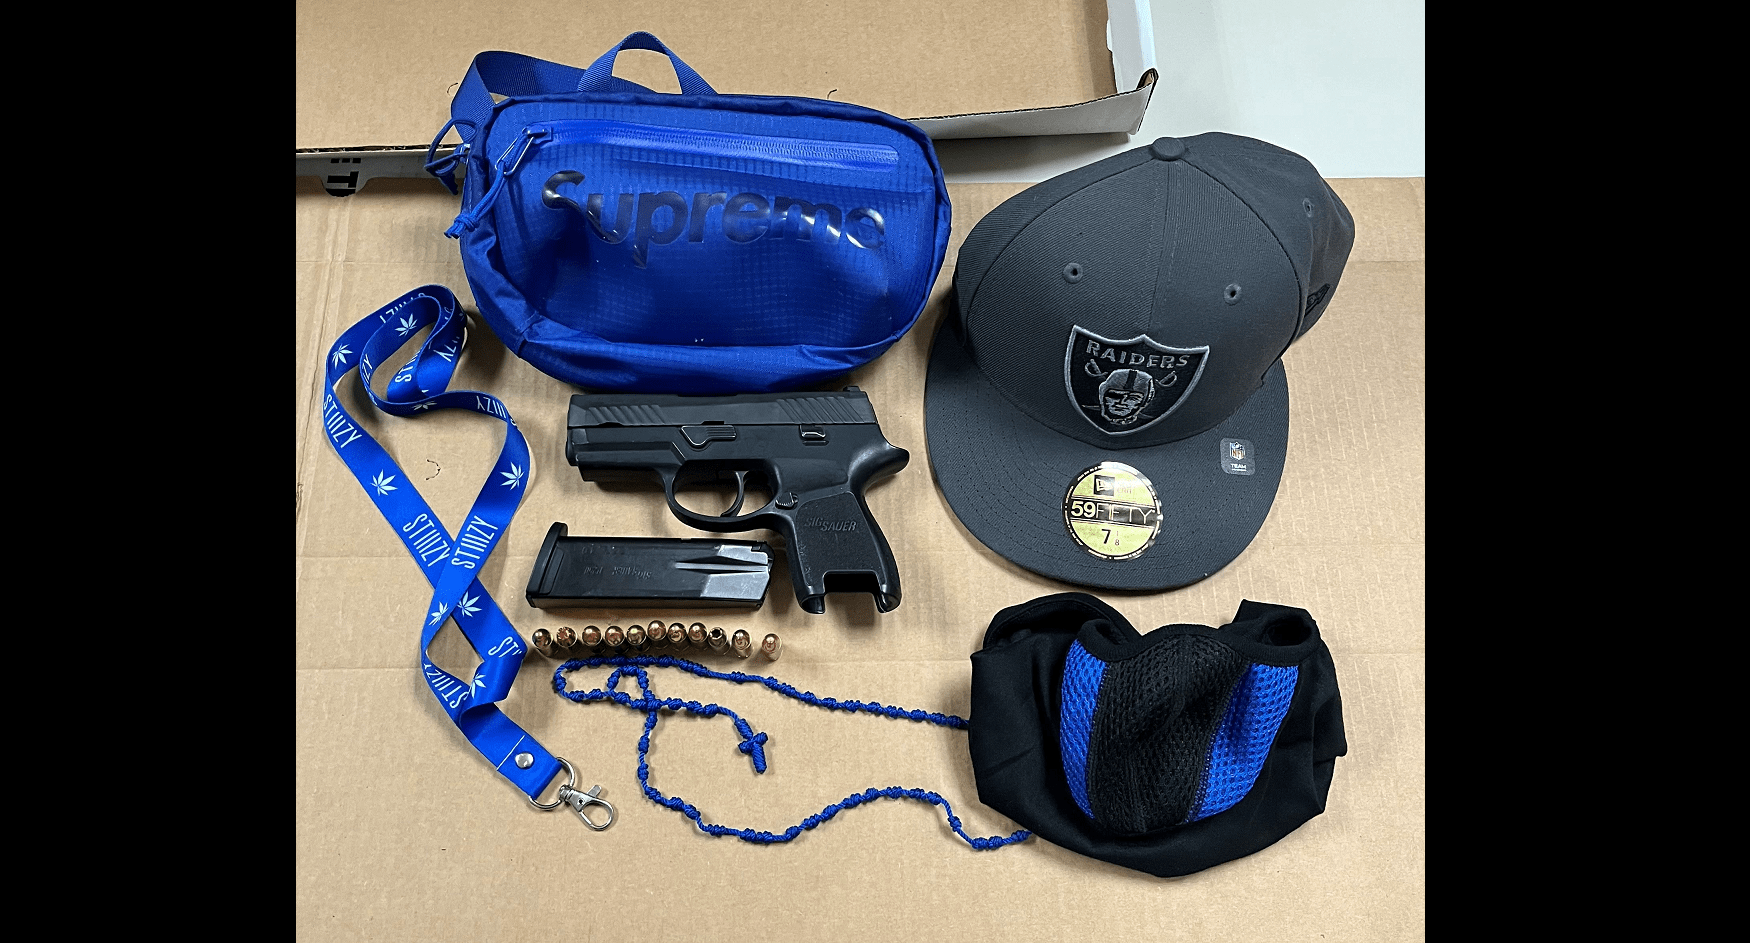 items-confiscated-from-three-gang-members-8-18-23-santa-rosa-police